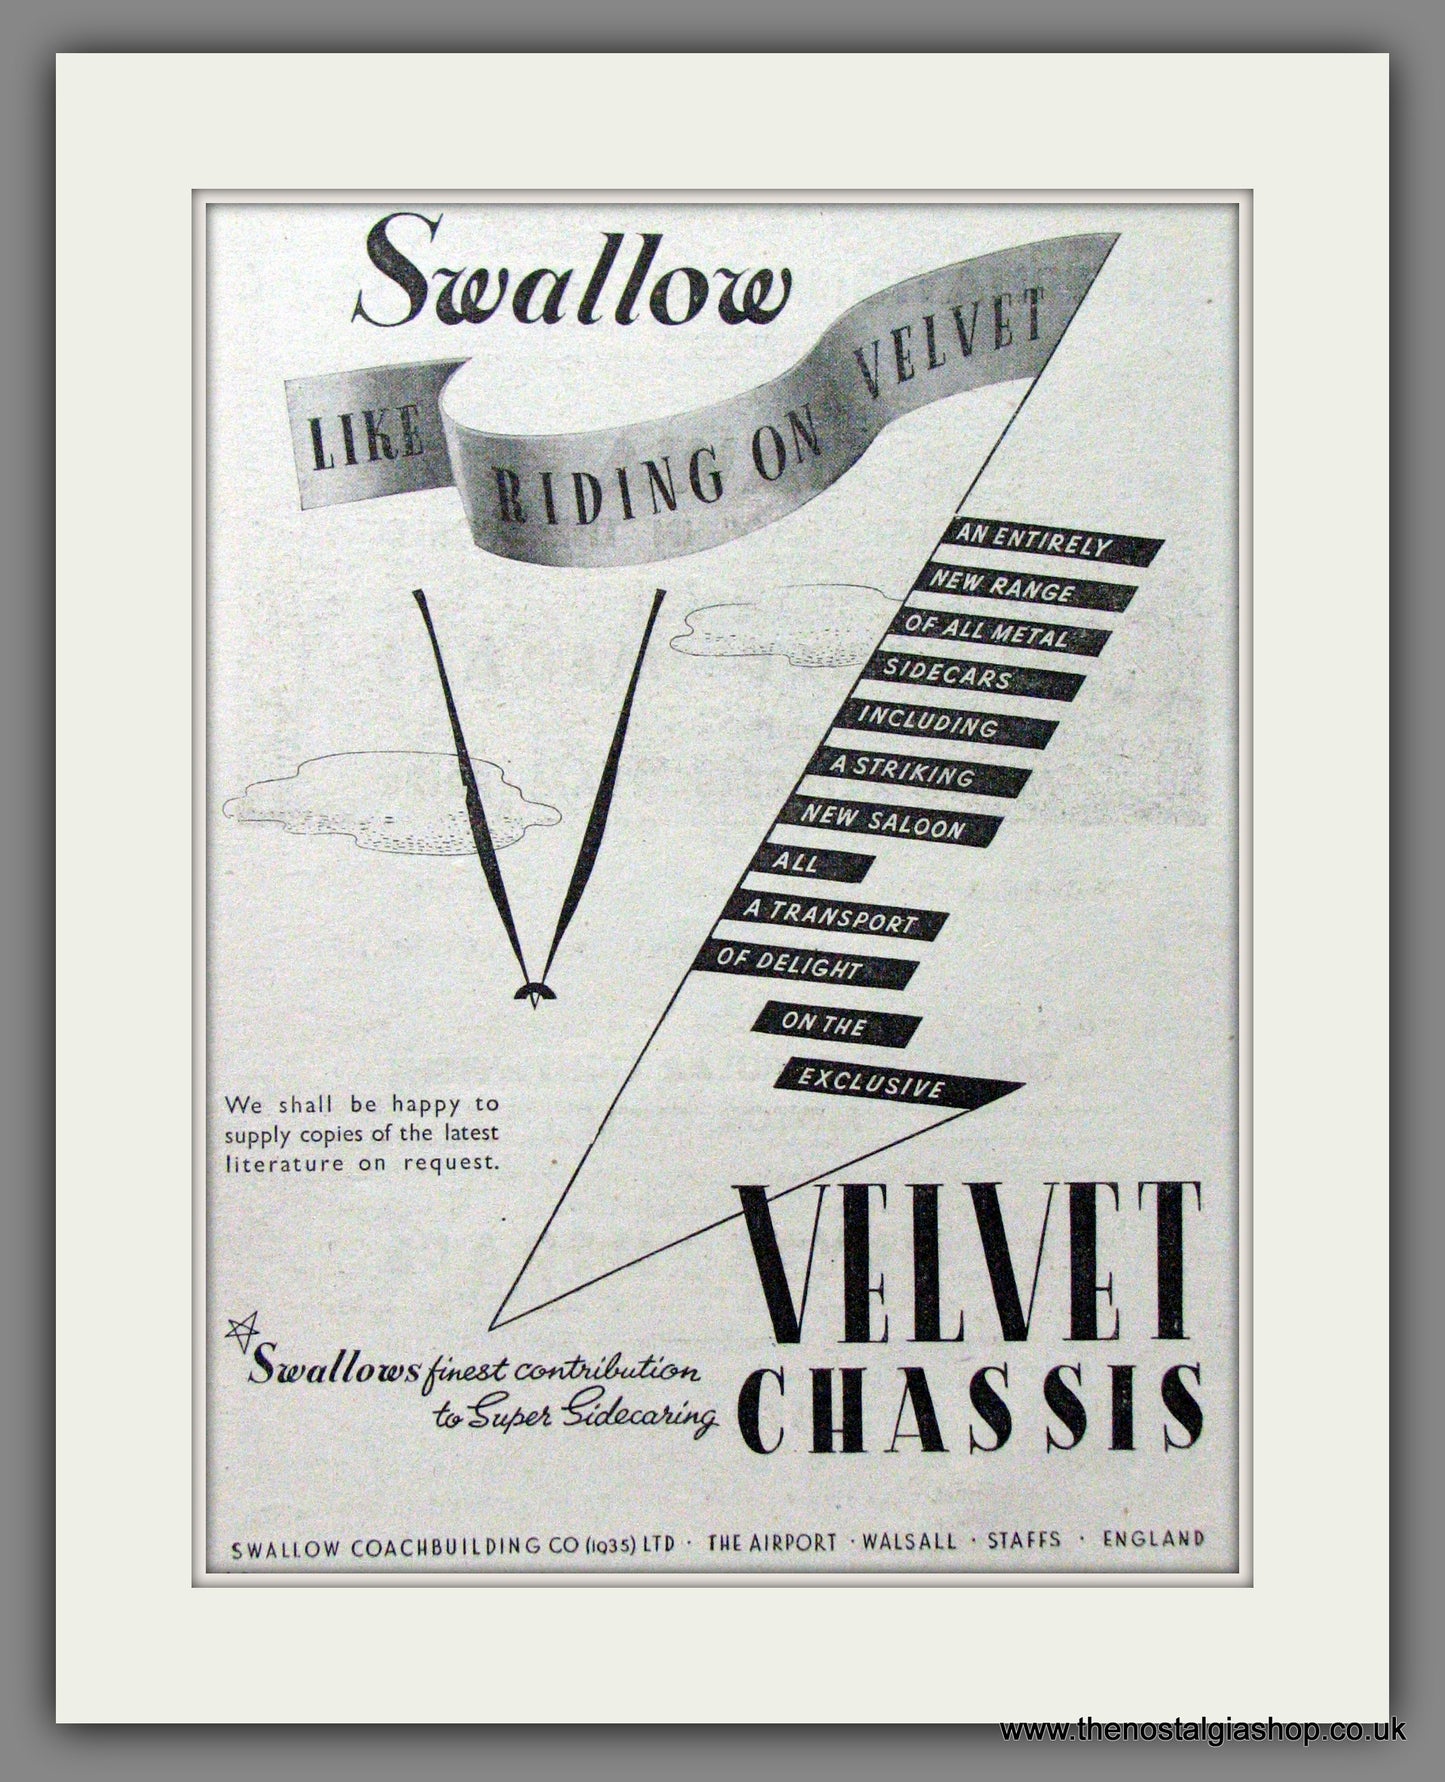 Swallow Scooters, Like Riding On Velvet. Original Advert 1948 (ref AD54033)